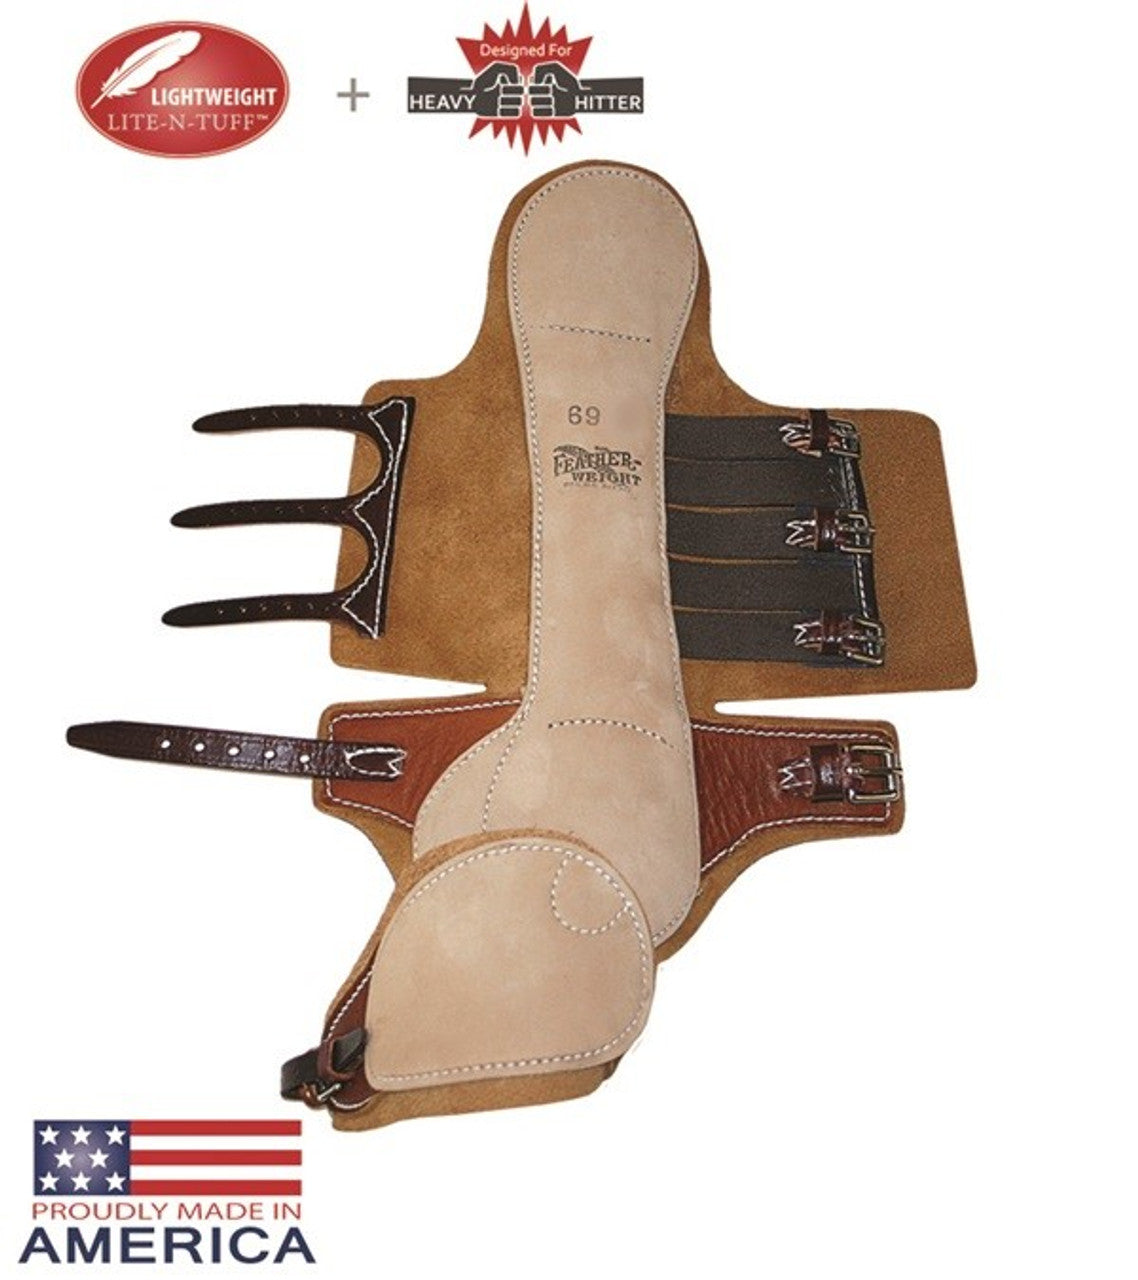 LITE-N-TUFF Feather-Weight Half Hock Shin & Ankle Boots-TexanSaddles.com